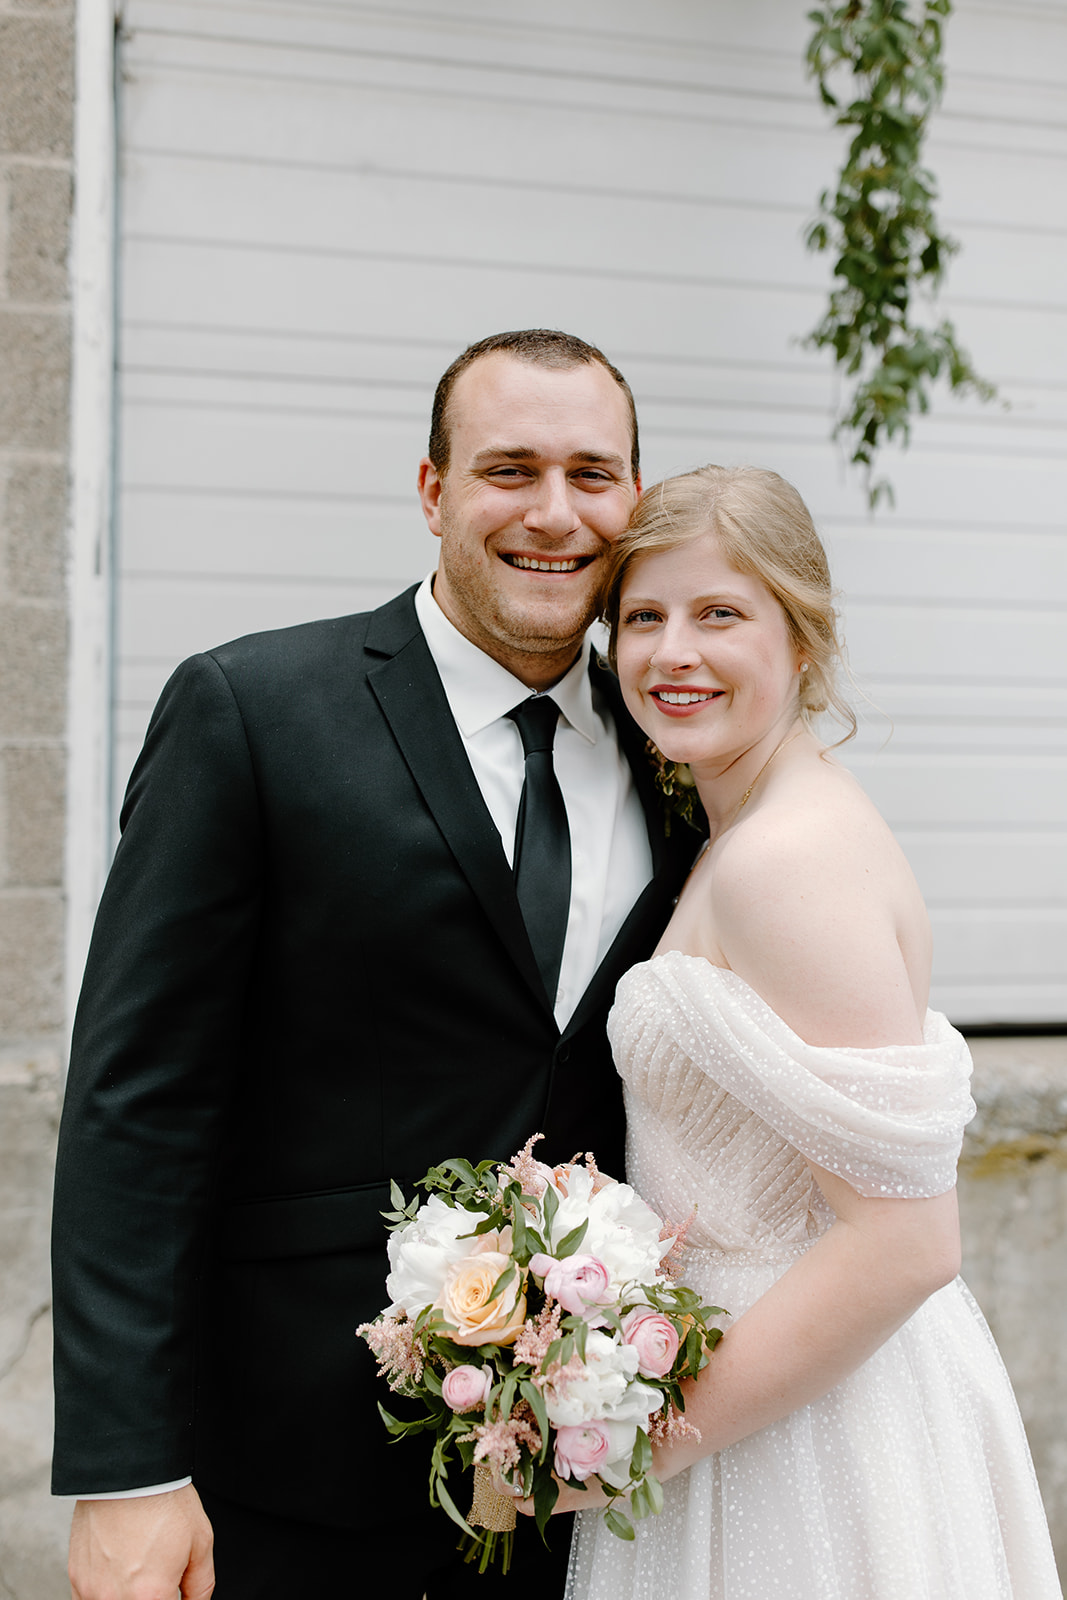 Bride and groom smile at the camera in front of a garage door